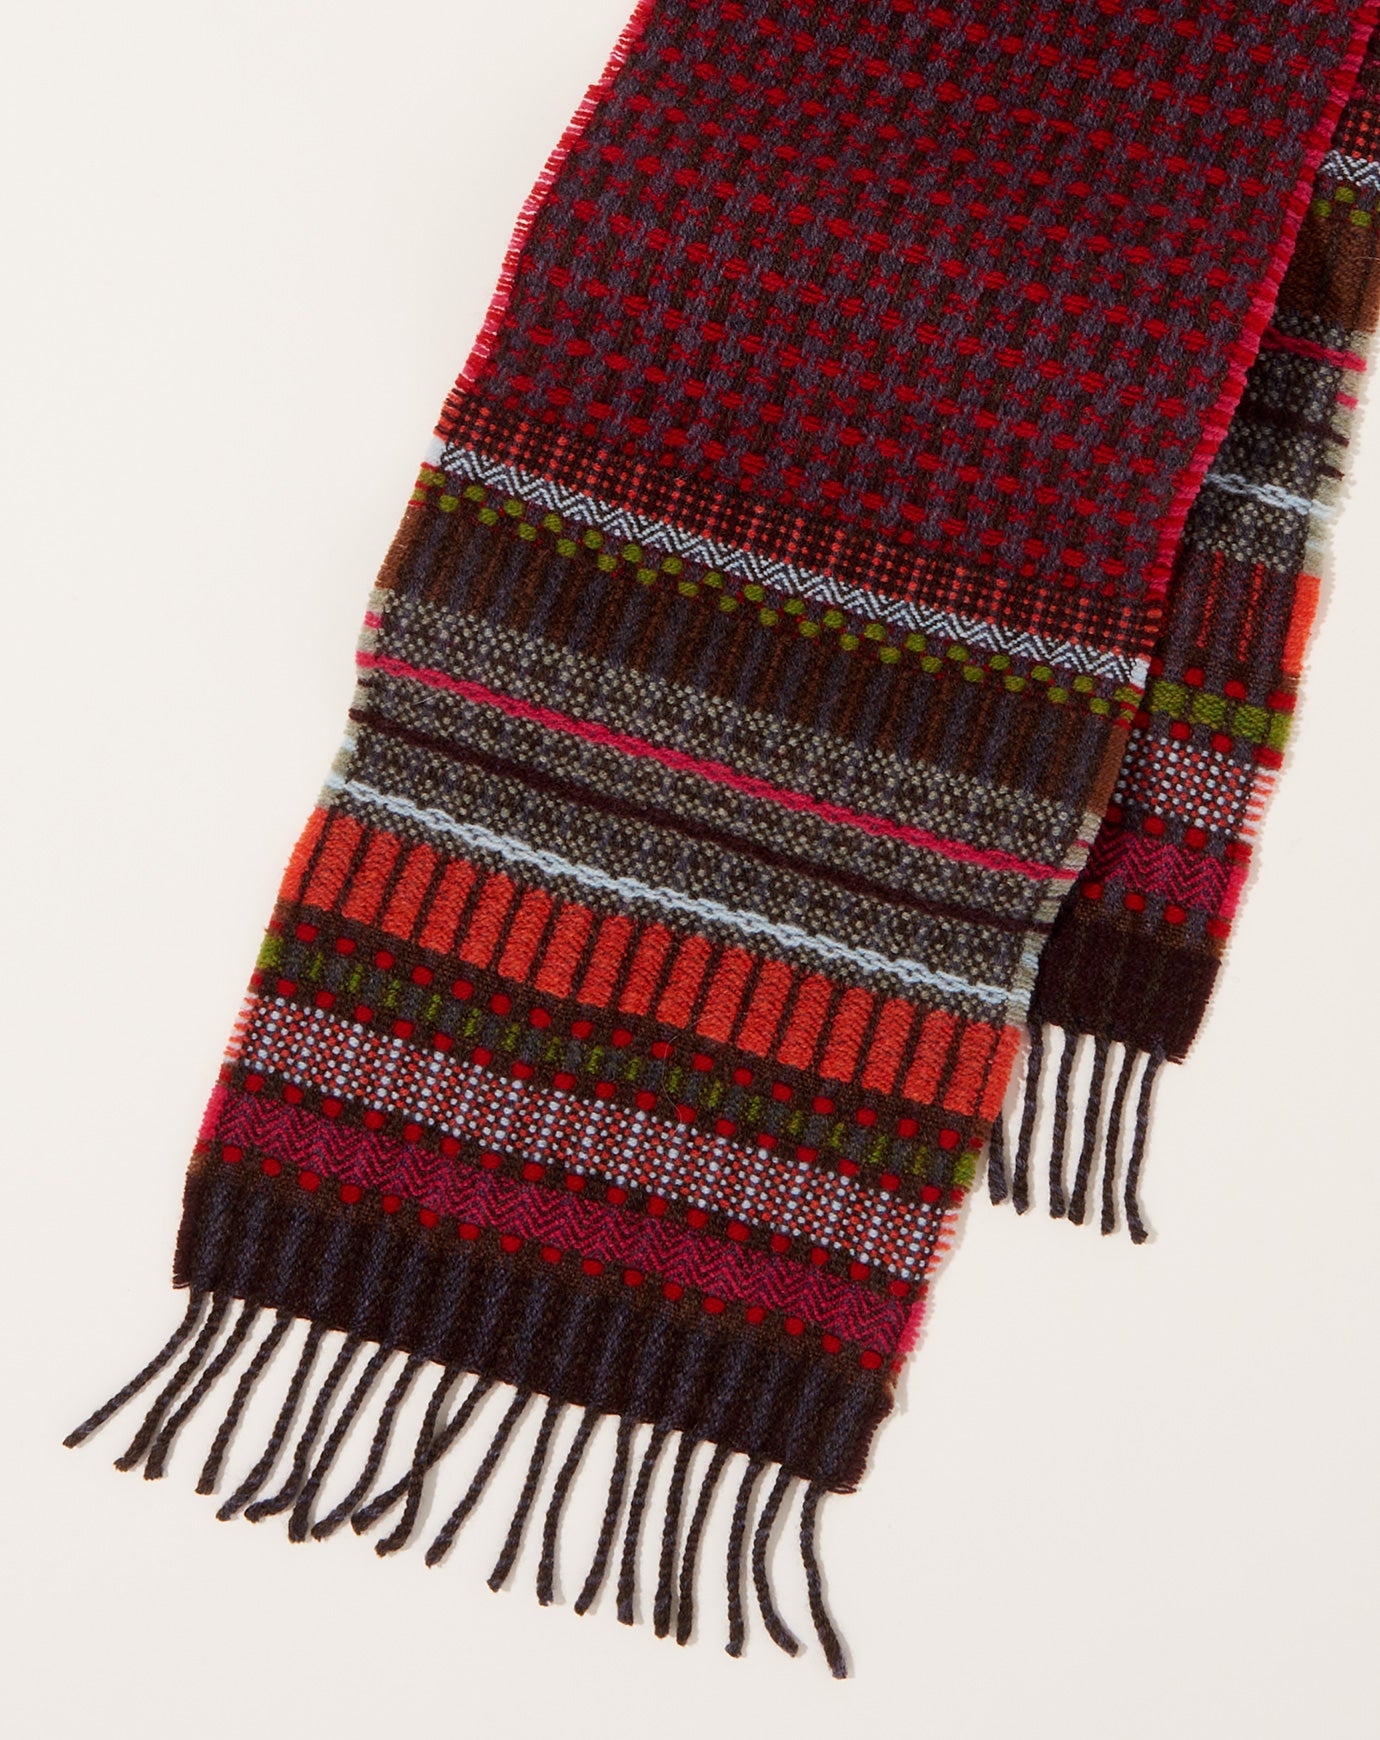 Wallace Sewell Fremont Scarf in Beetroot